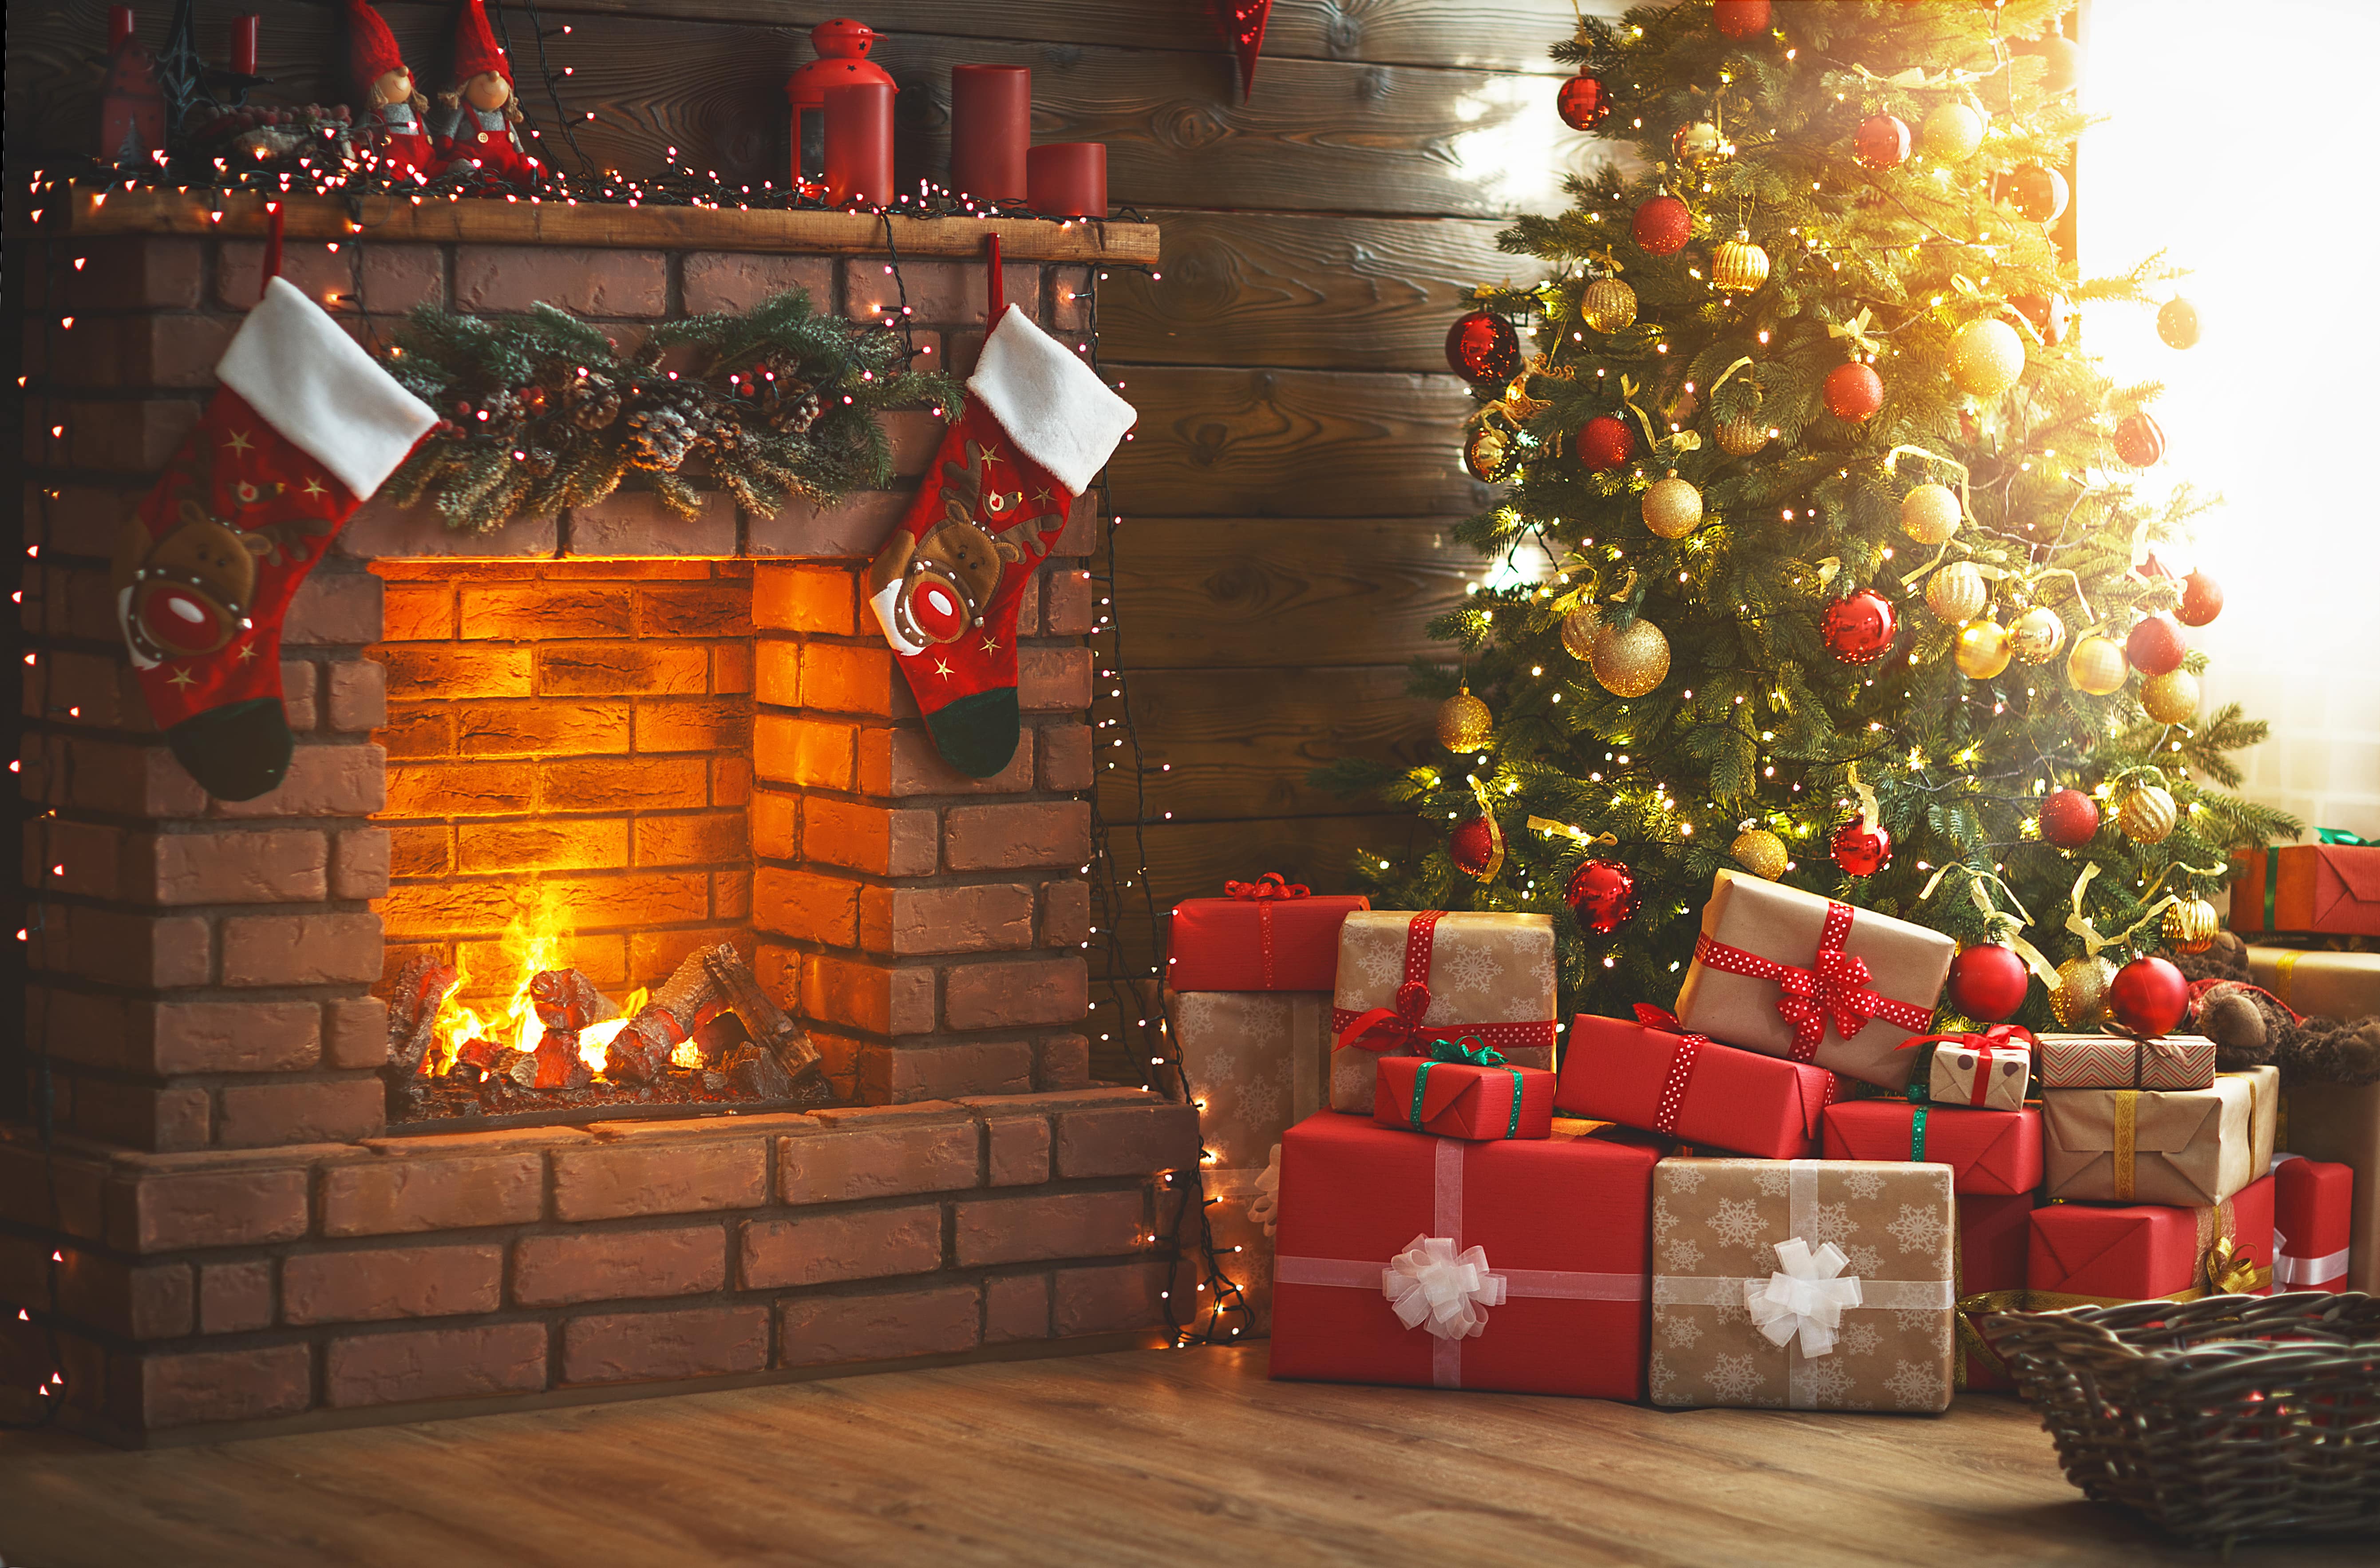 A home at Christmas time. The presents are nestled under the Christmas tree, the stockings are hung on the fireplace and twinkling Christmas lights festively light the room.